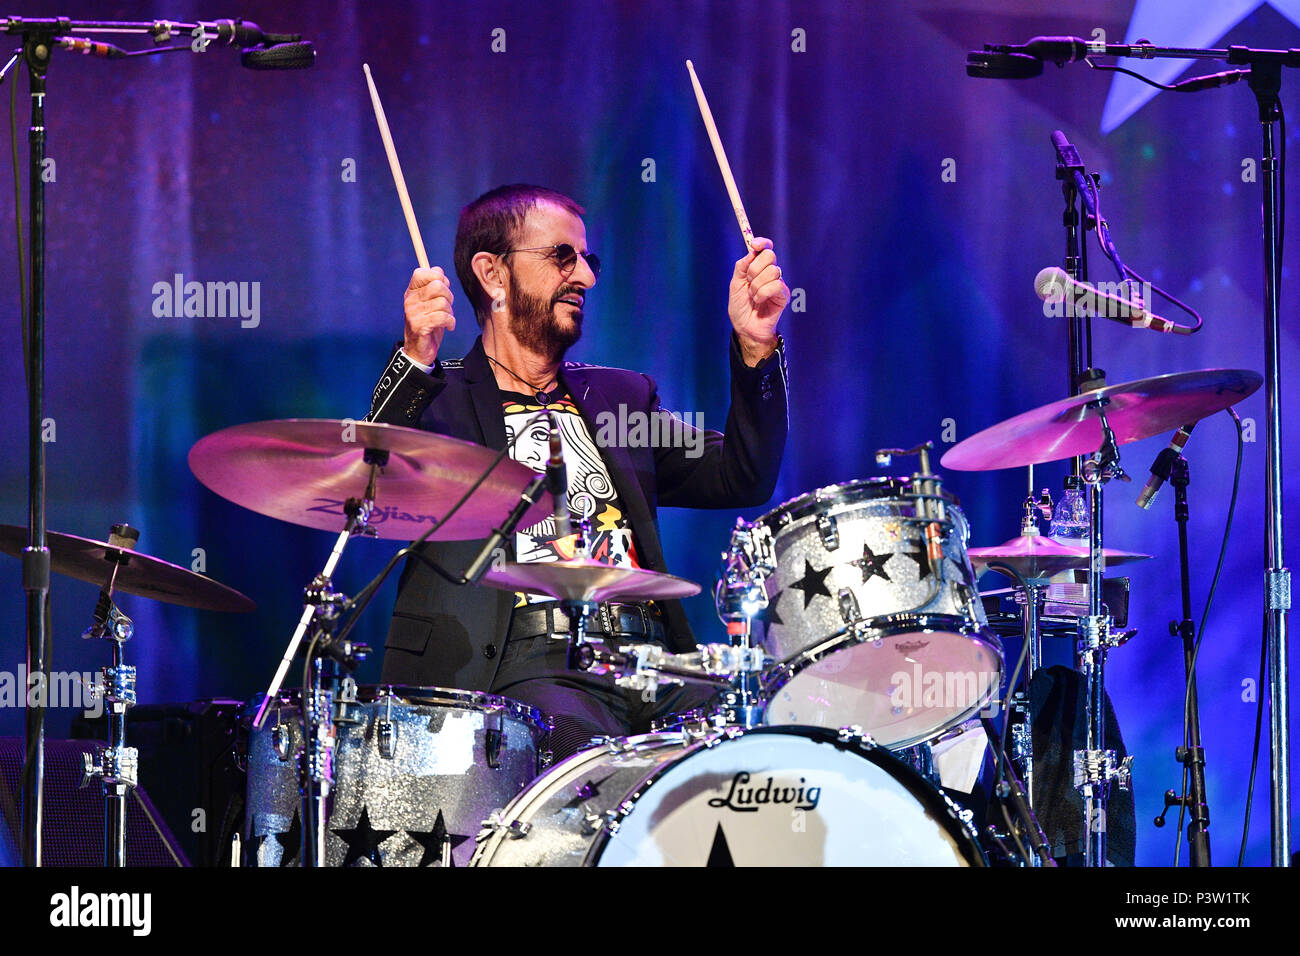 Prague, Czech Republic. 19th June, 2018. British singer Ringo Starr performs during the concert with his All Star Band at the Prague Congress Centre, Czech Republic, on June 19, 2018. Credit: Michal Kamaryt/CTK Photo/Alamy Live News Stock Photo